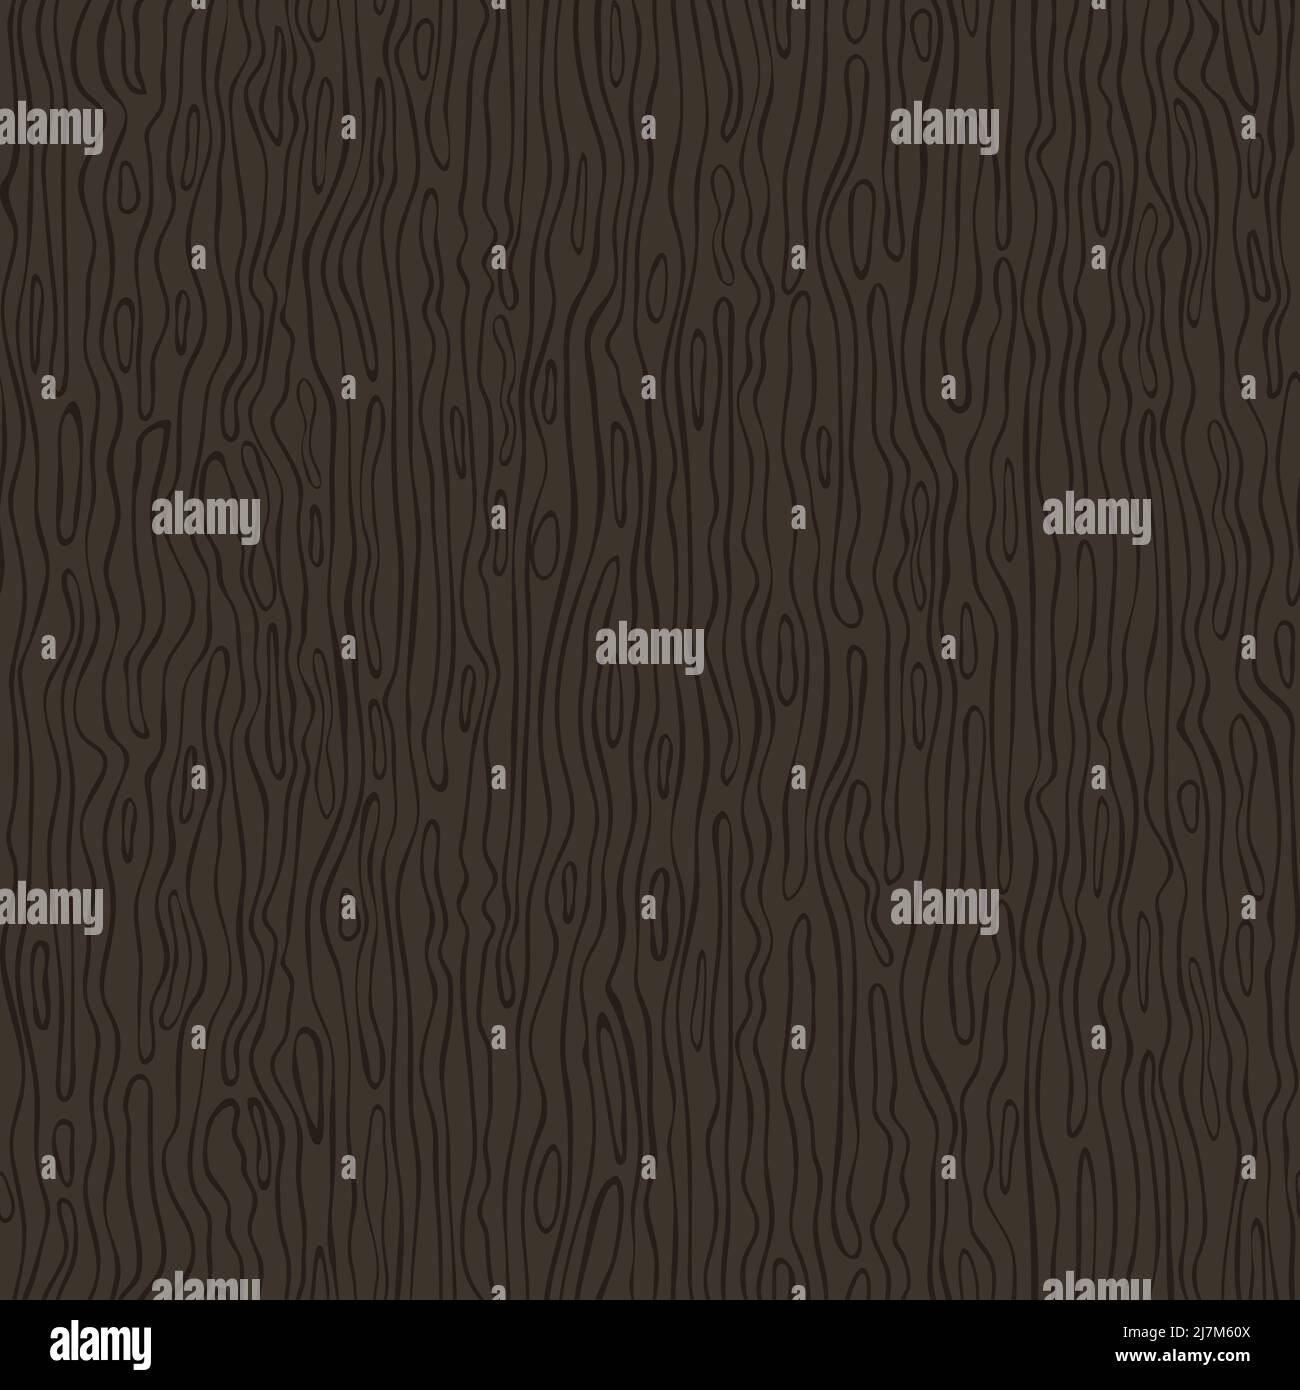 Seamless vector pattern with tree bark texture on dark brown background. Simple wavy line wallpaper design. Decorative stripe fashion textile. Stock Vector